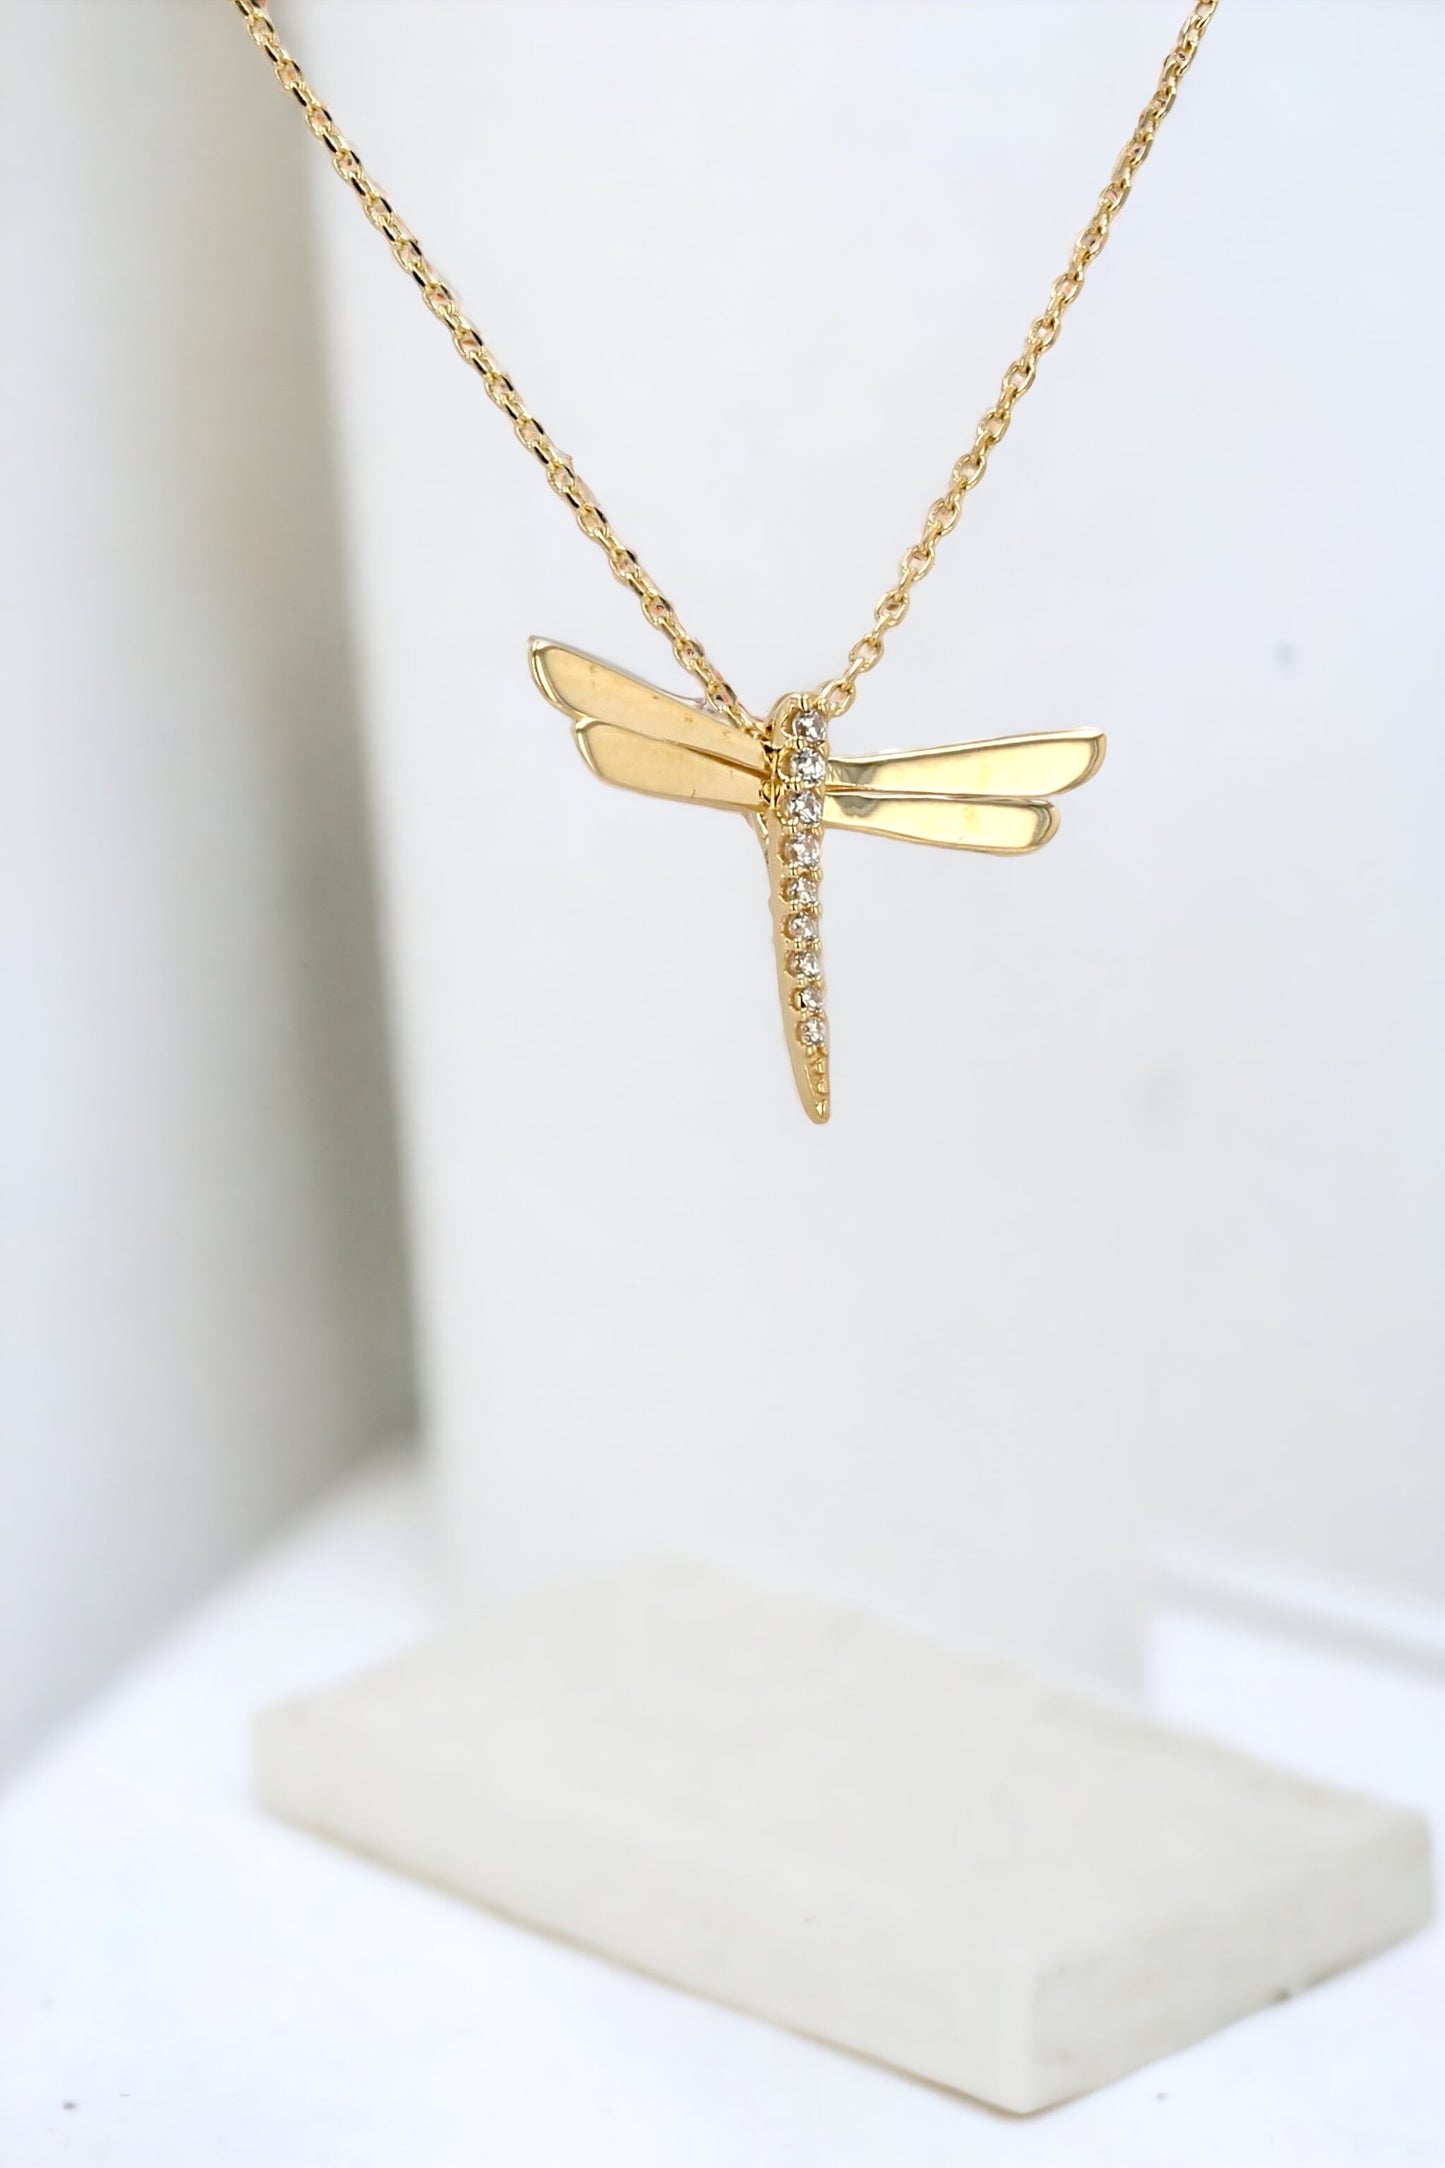 14K Yellow gold dragonfly necklace-226114